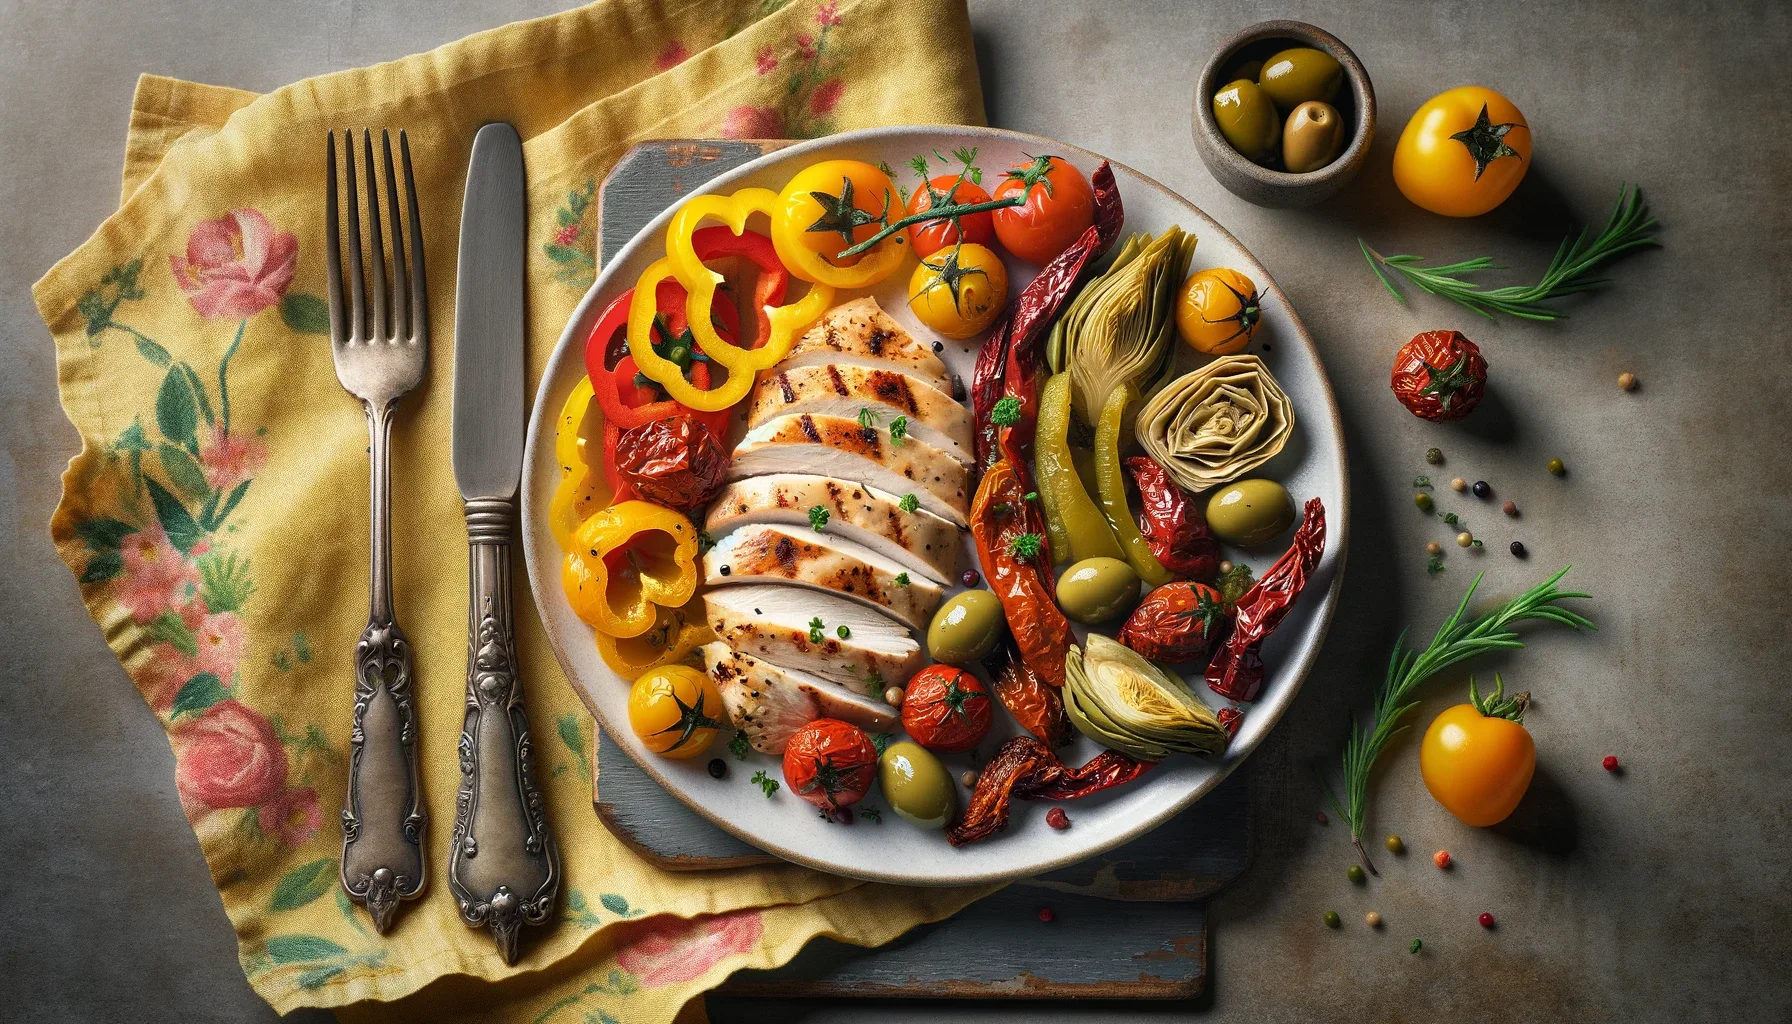 A Mediterranean keto diet plate of food, including chicken, olives, bell peppers, roasted tomatos and artichoke hearts.